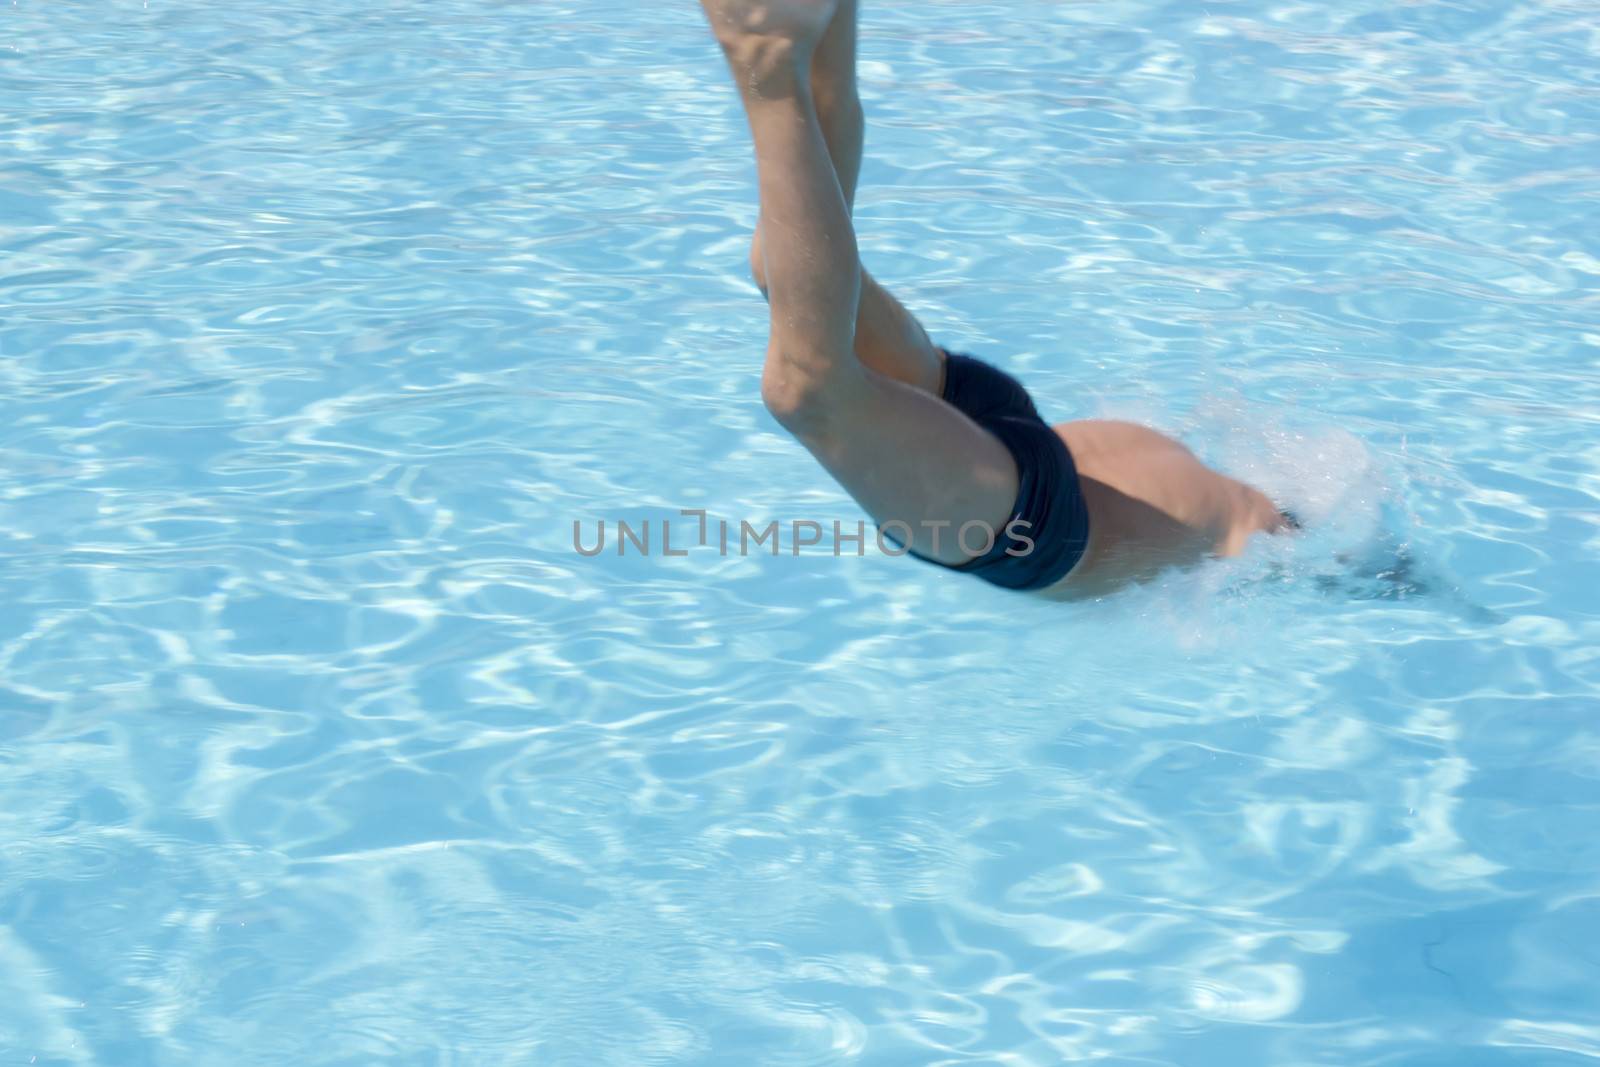 Activities on the pool. Boy diving in swimming pool by Tetyana